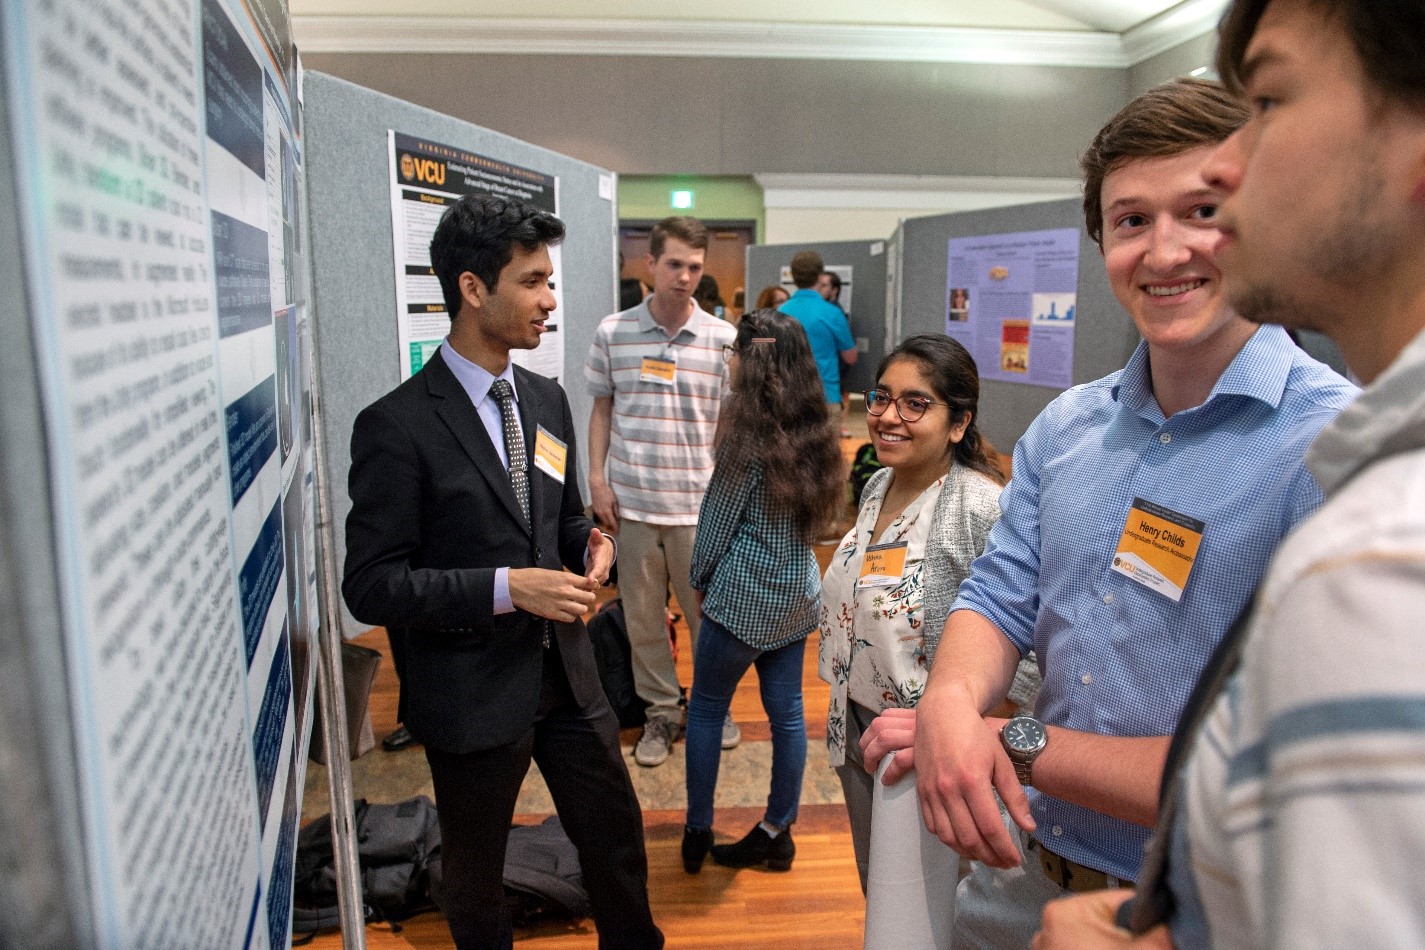 Students present research posters